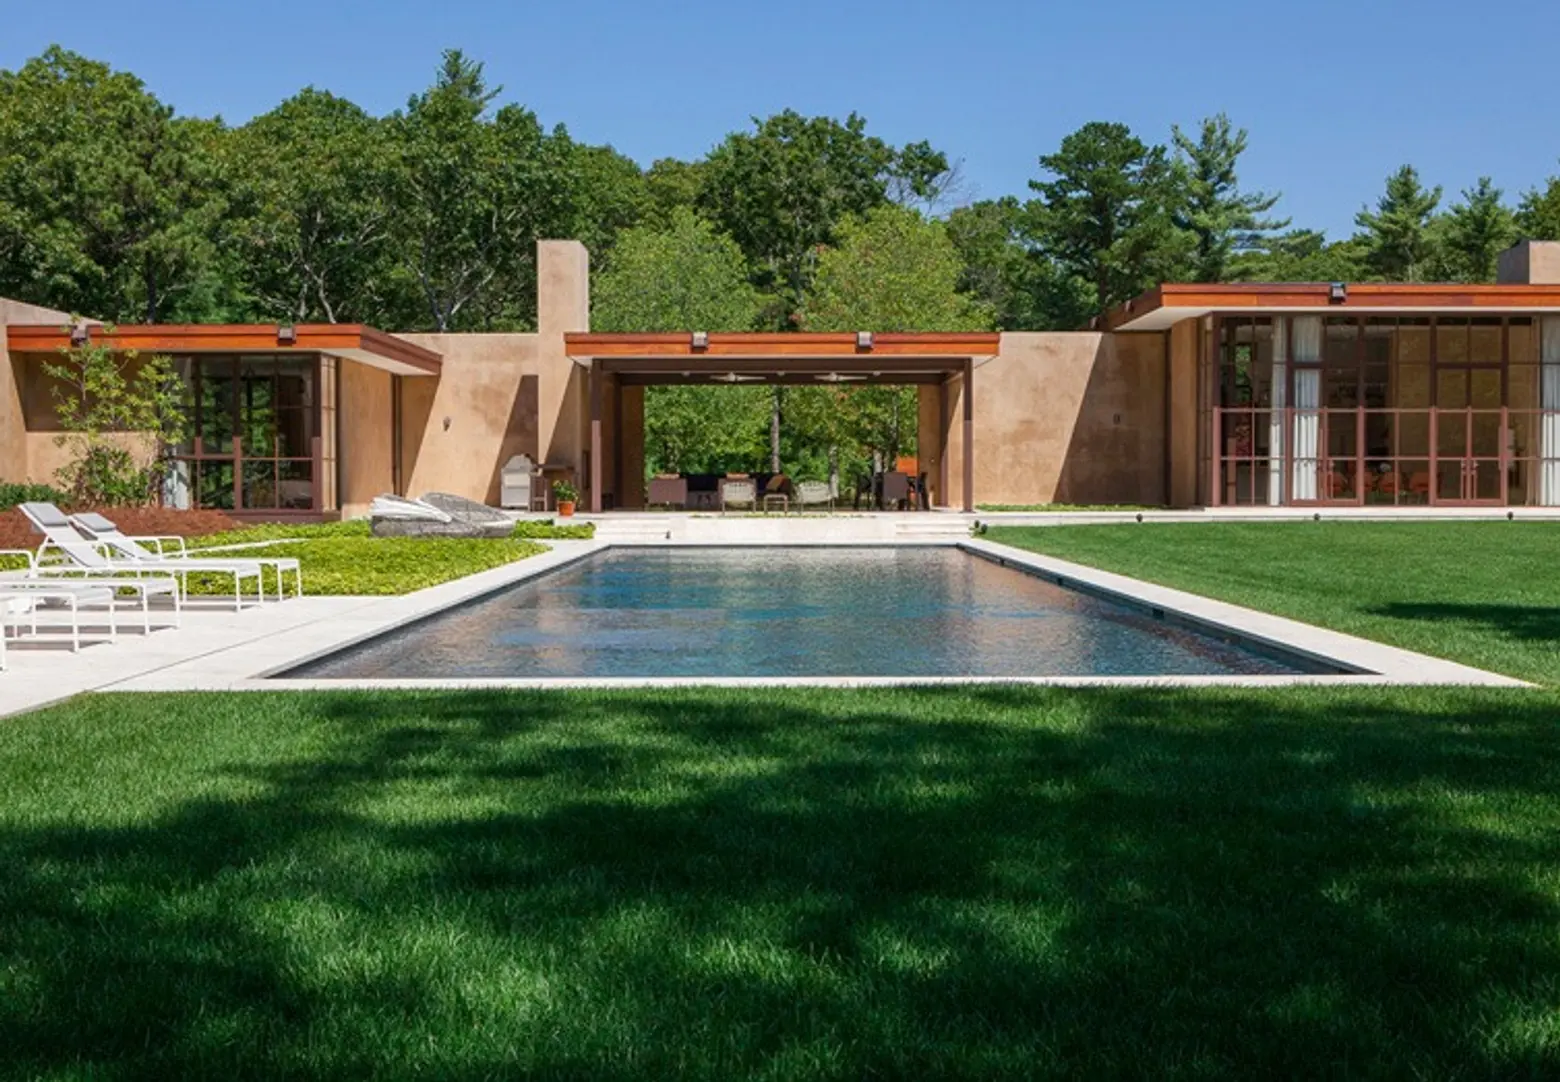 Michael Haverland’s 20-acre East Hampton ‘campus’ is arranged around a series of courtyards